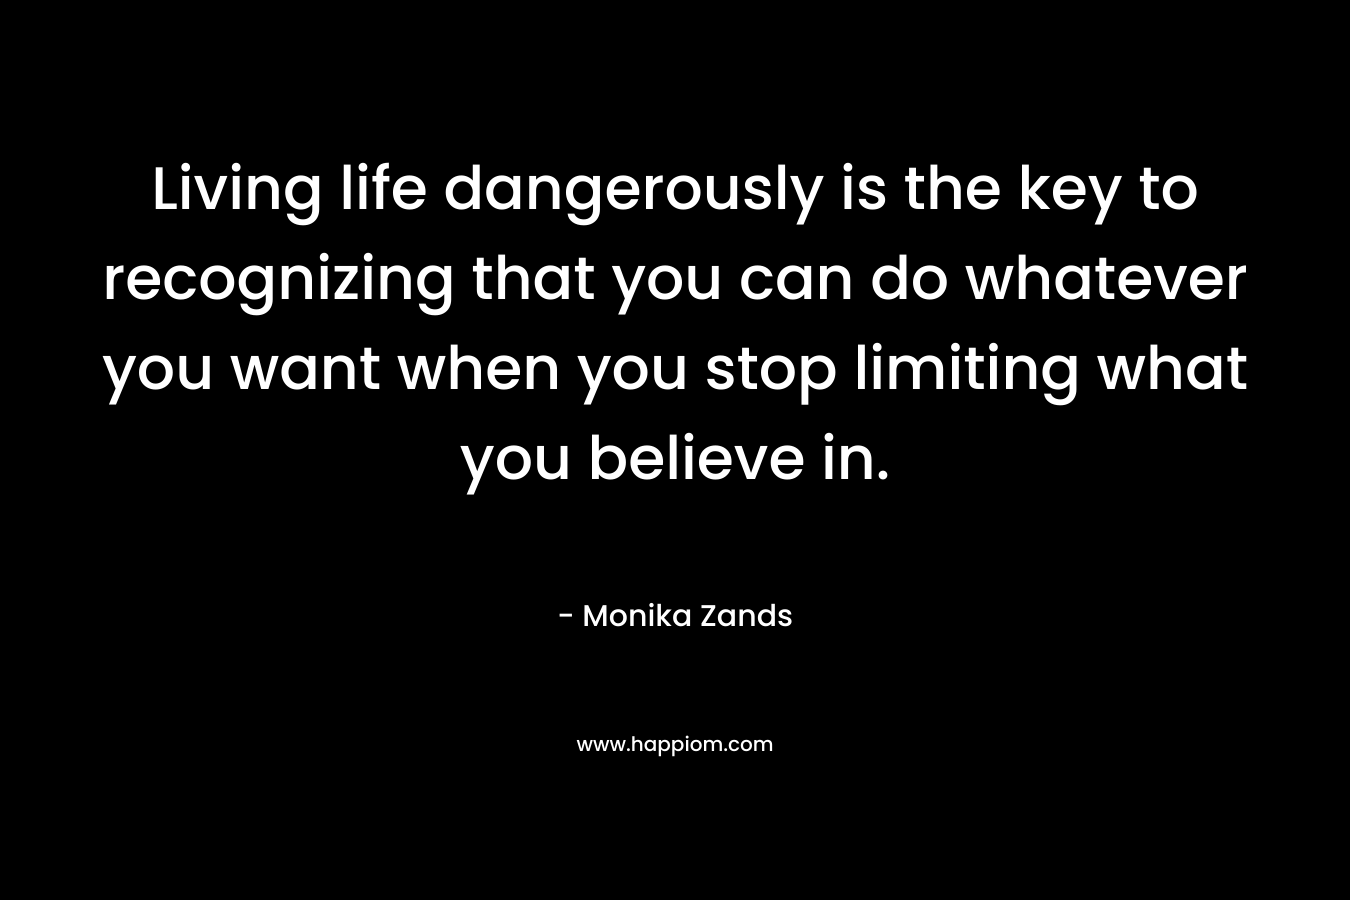 Living life dangerously is the key to recognizing that you can do whatever you want when you stop limiting what you believe in. – Monika Zands